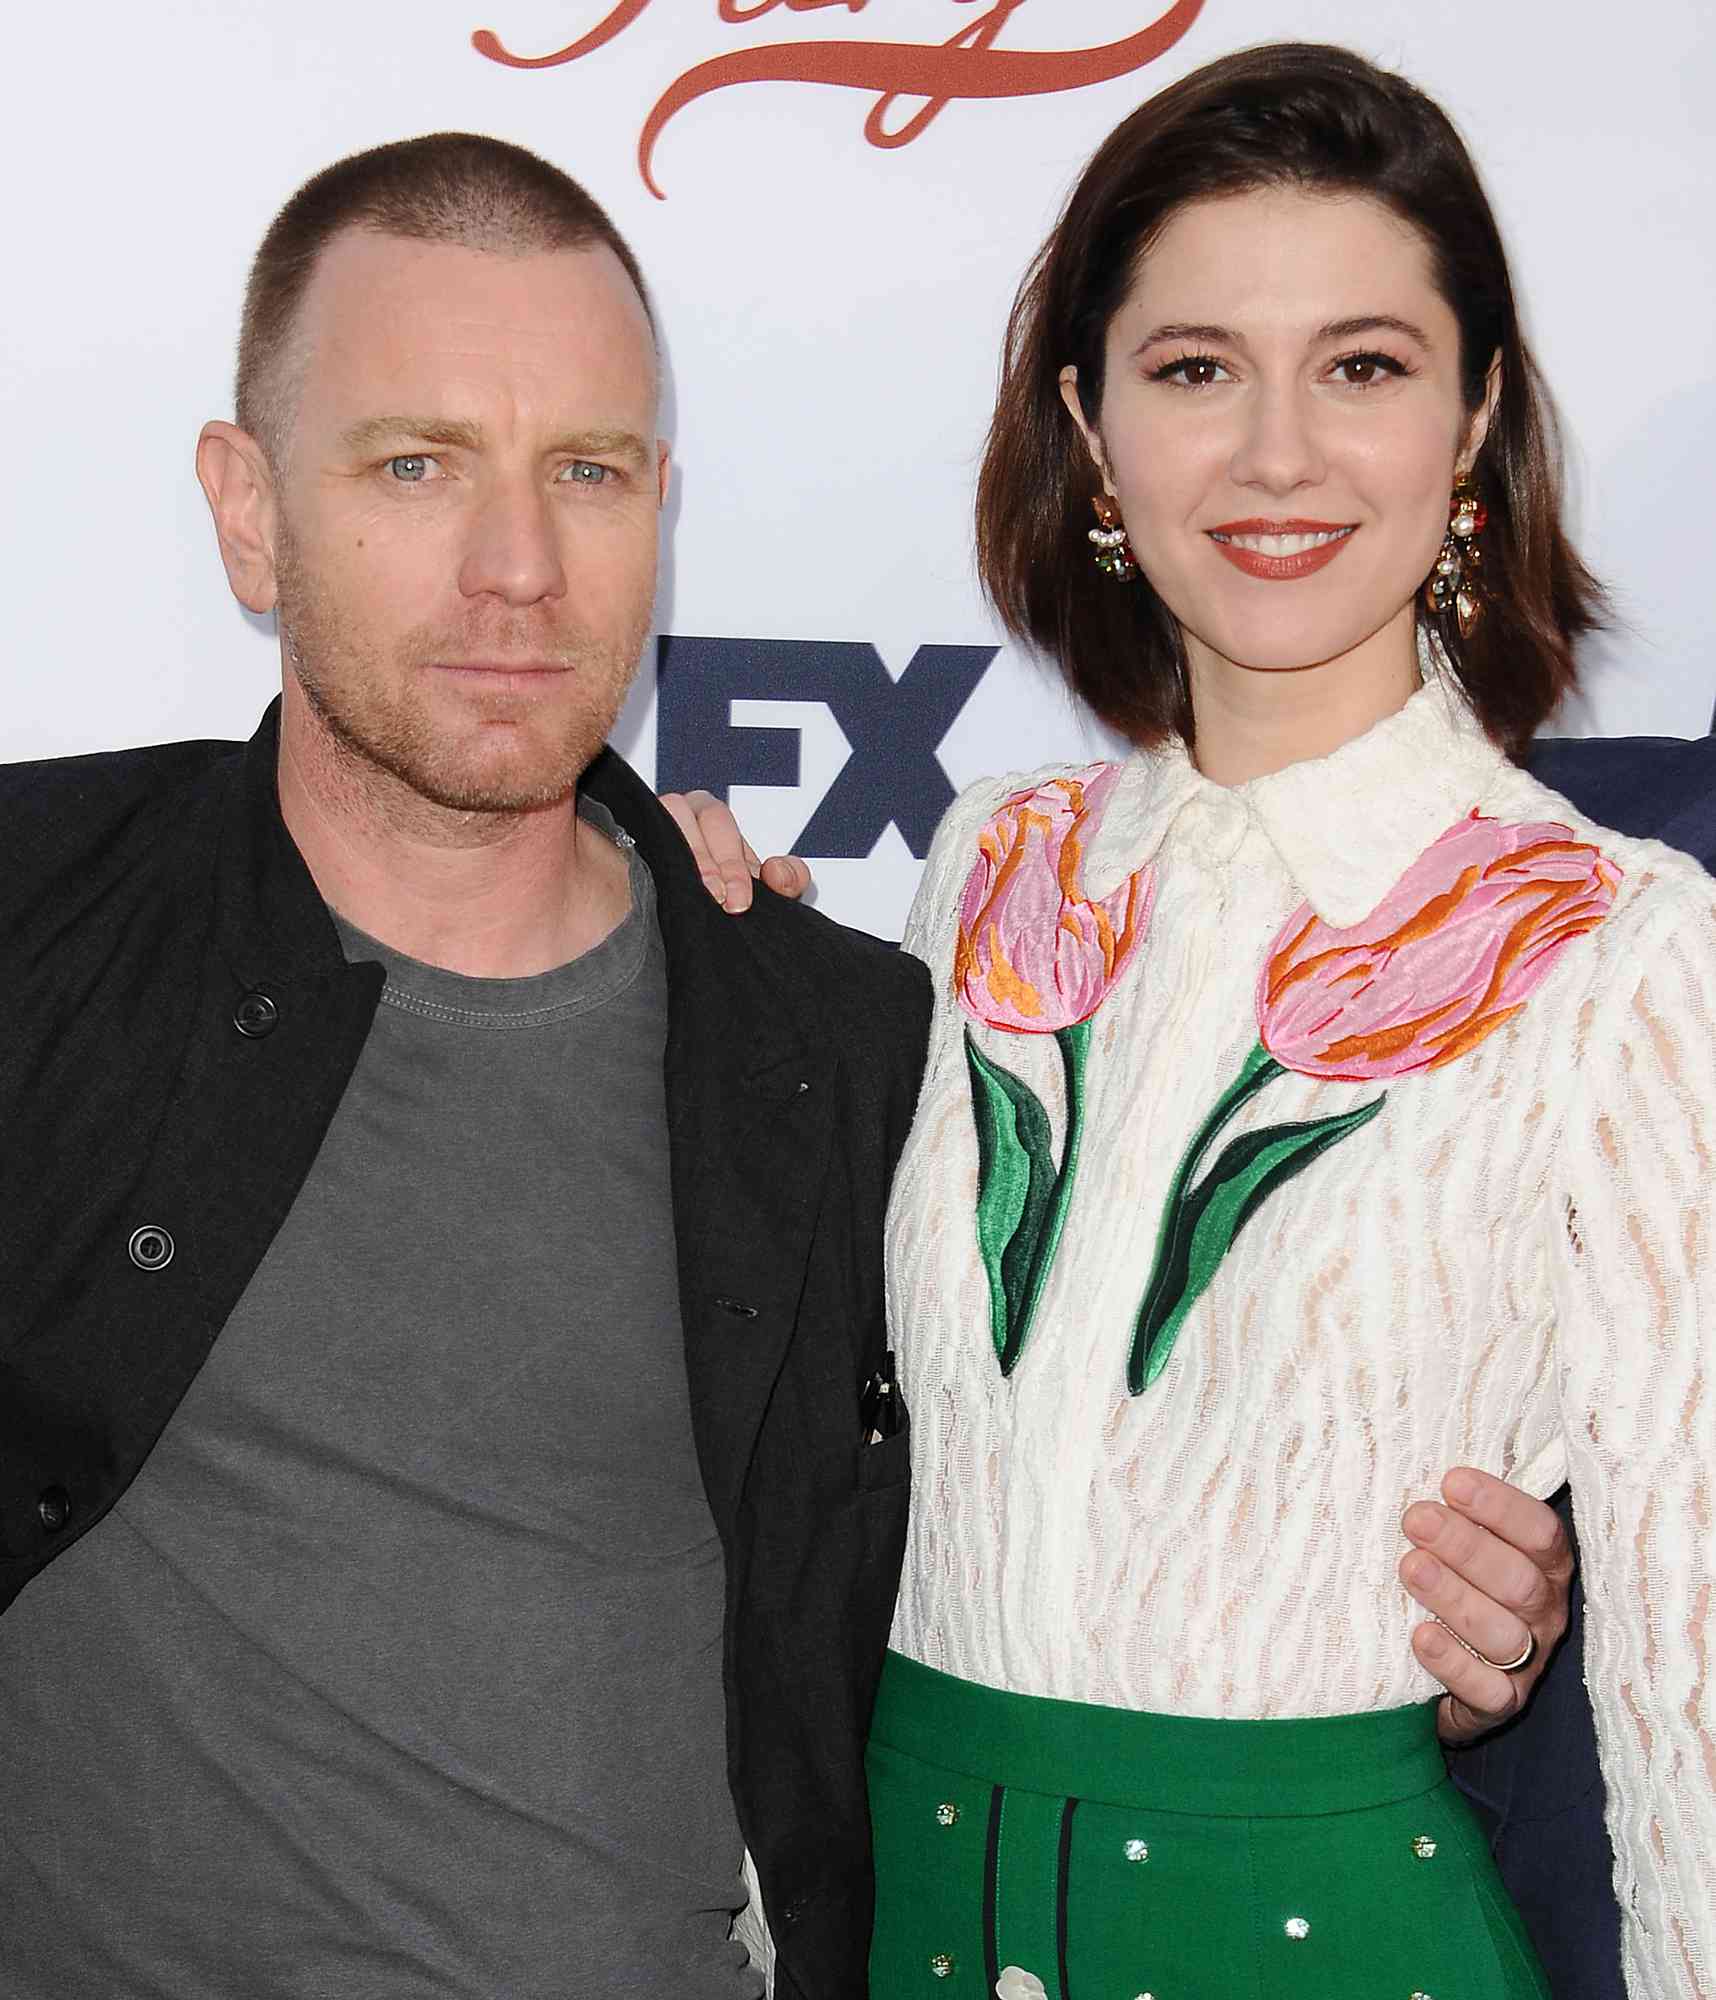 Actor Ewan McGregor and actress Mary Elizabeth Winstead attend the "Fargo" For Your Consideration event at Saban Media Center on May 11, 2017 in North Hollywood, California